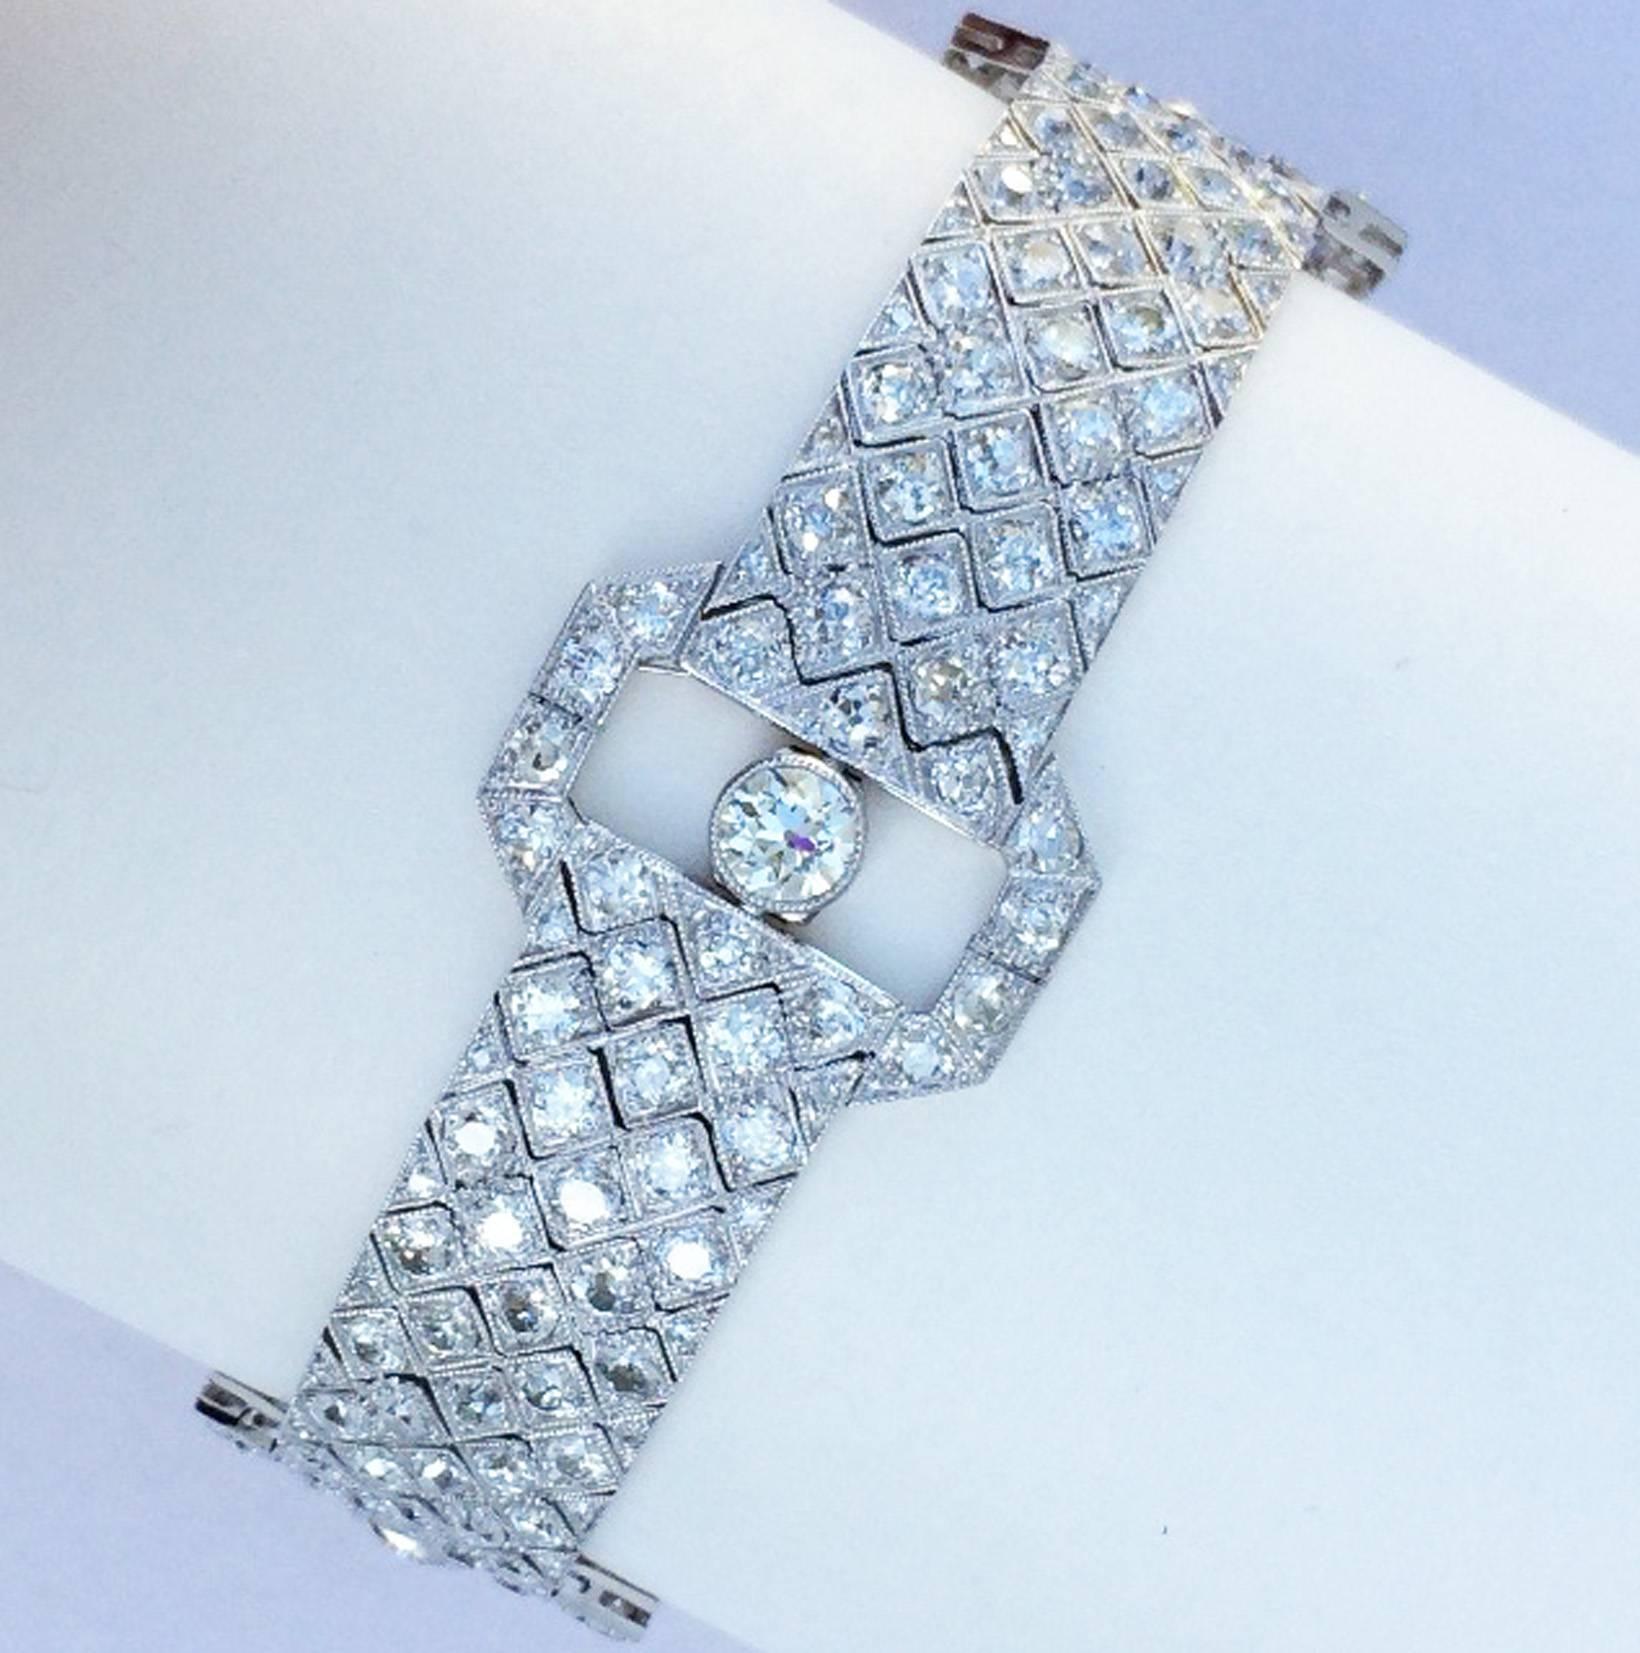 A exquisite art deco diamond and platinum bracelet. Hallmarked item for Benjamin Harry Britton & Sons (Birmingham), circa 1925. Precision linked item features old European and European cut diamonds (SI 2), approx. 20ctw including four .5ct centers.